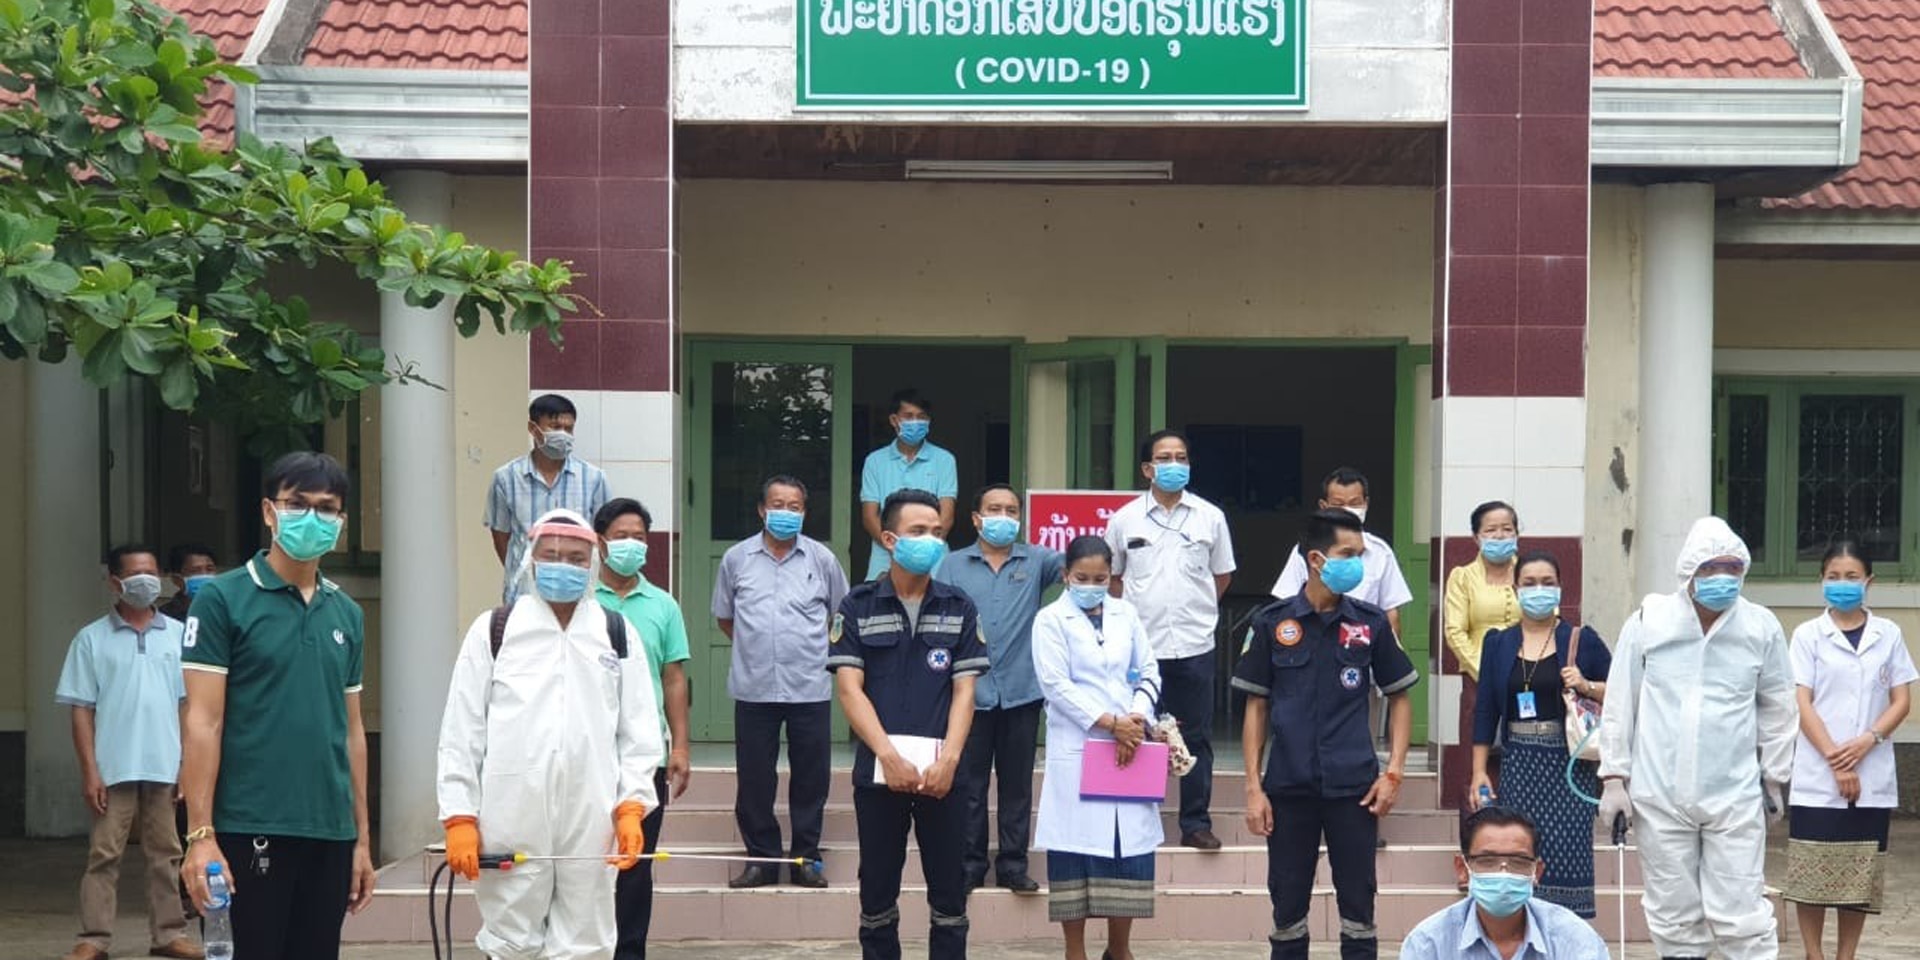  The staff of a hospital in Laos stand in front of the entrance to a COVID-19 ward wearing protective masks. 